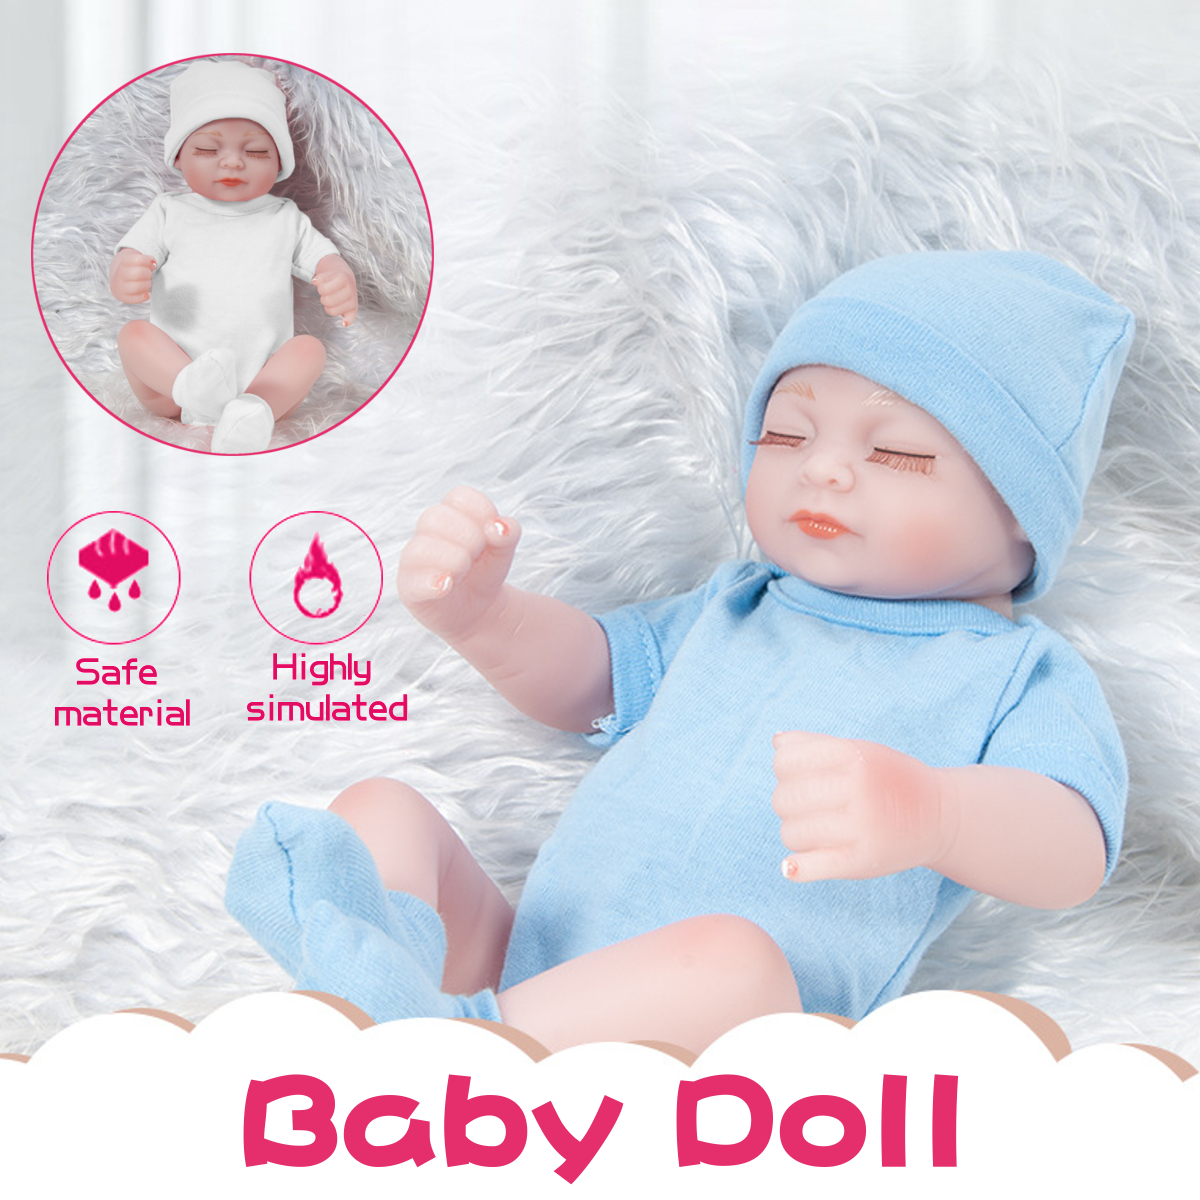 28CM-Soft-Silicone-Realistic-Sleeping-Reborns-Lifelikes-Newborns-Baby-Doll-Toy-with-Moveable-Head-Ar-1891375-2